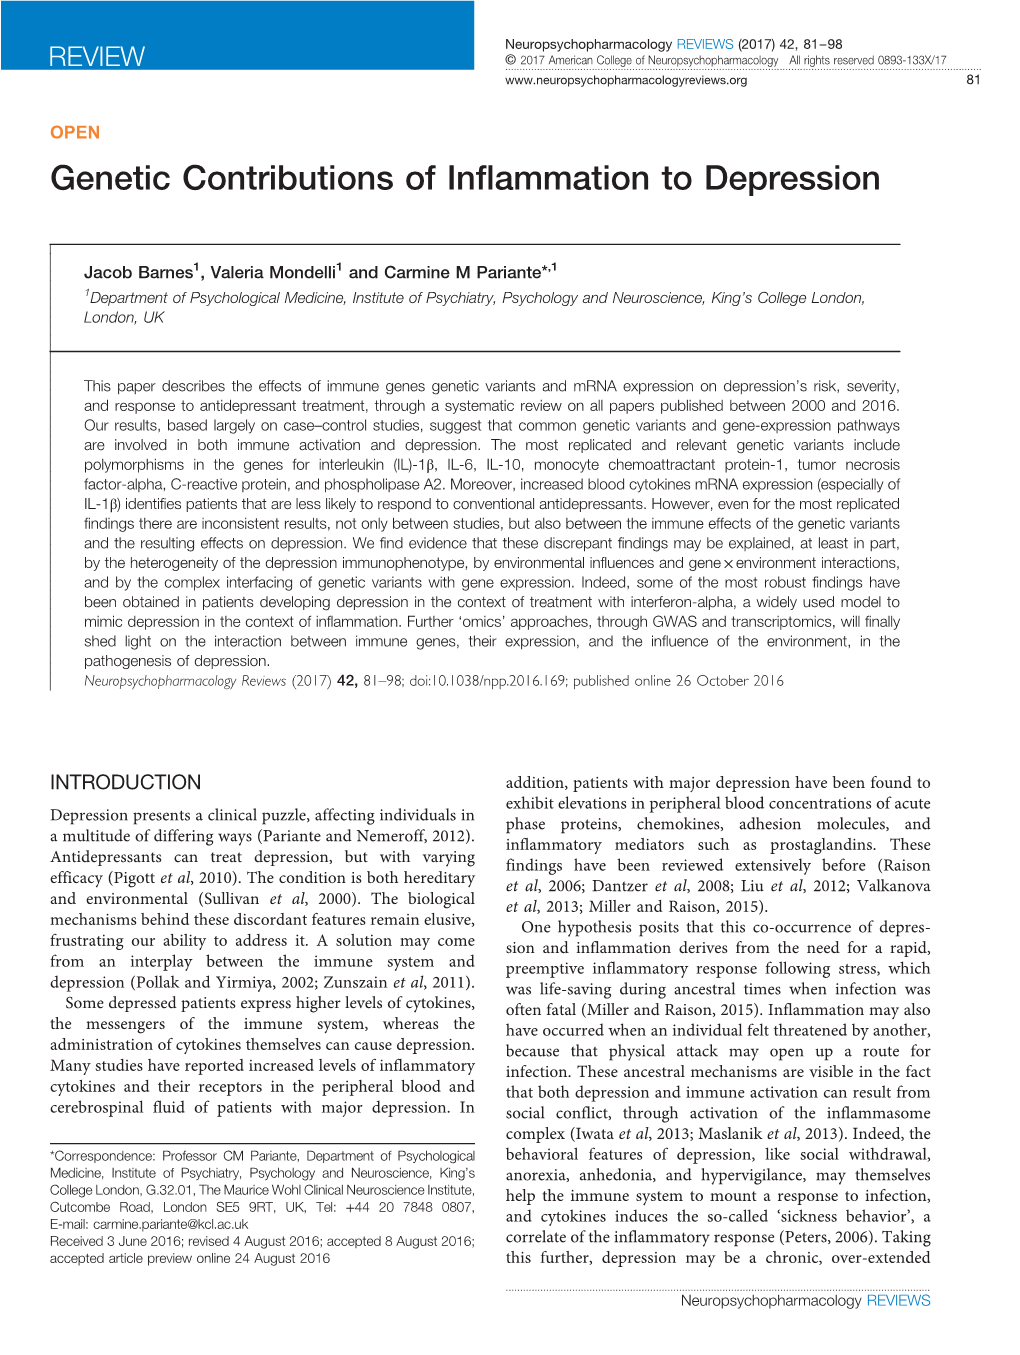 Genetic Contributions of Inflammation to Depression